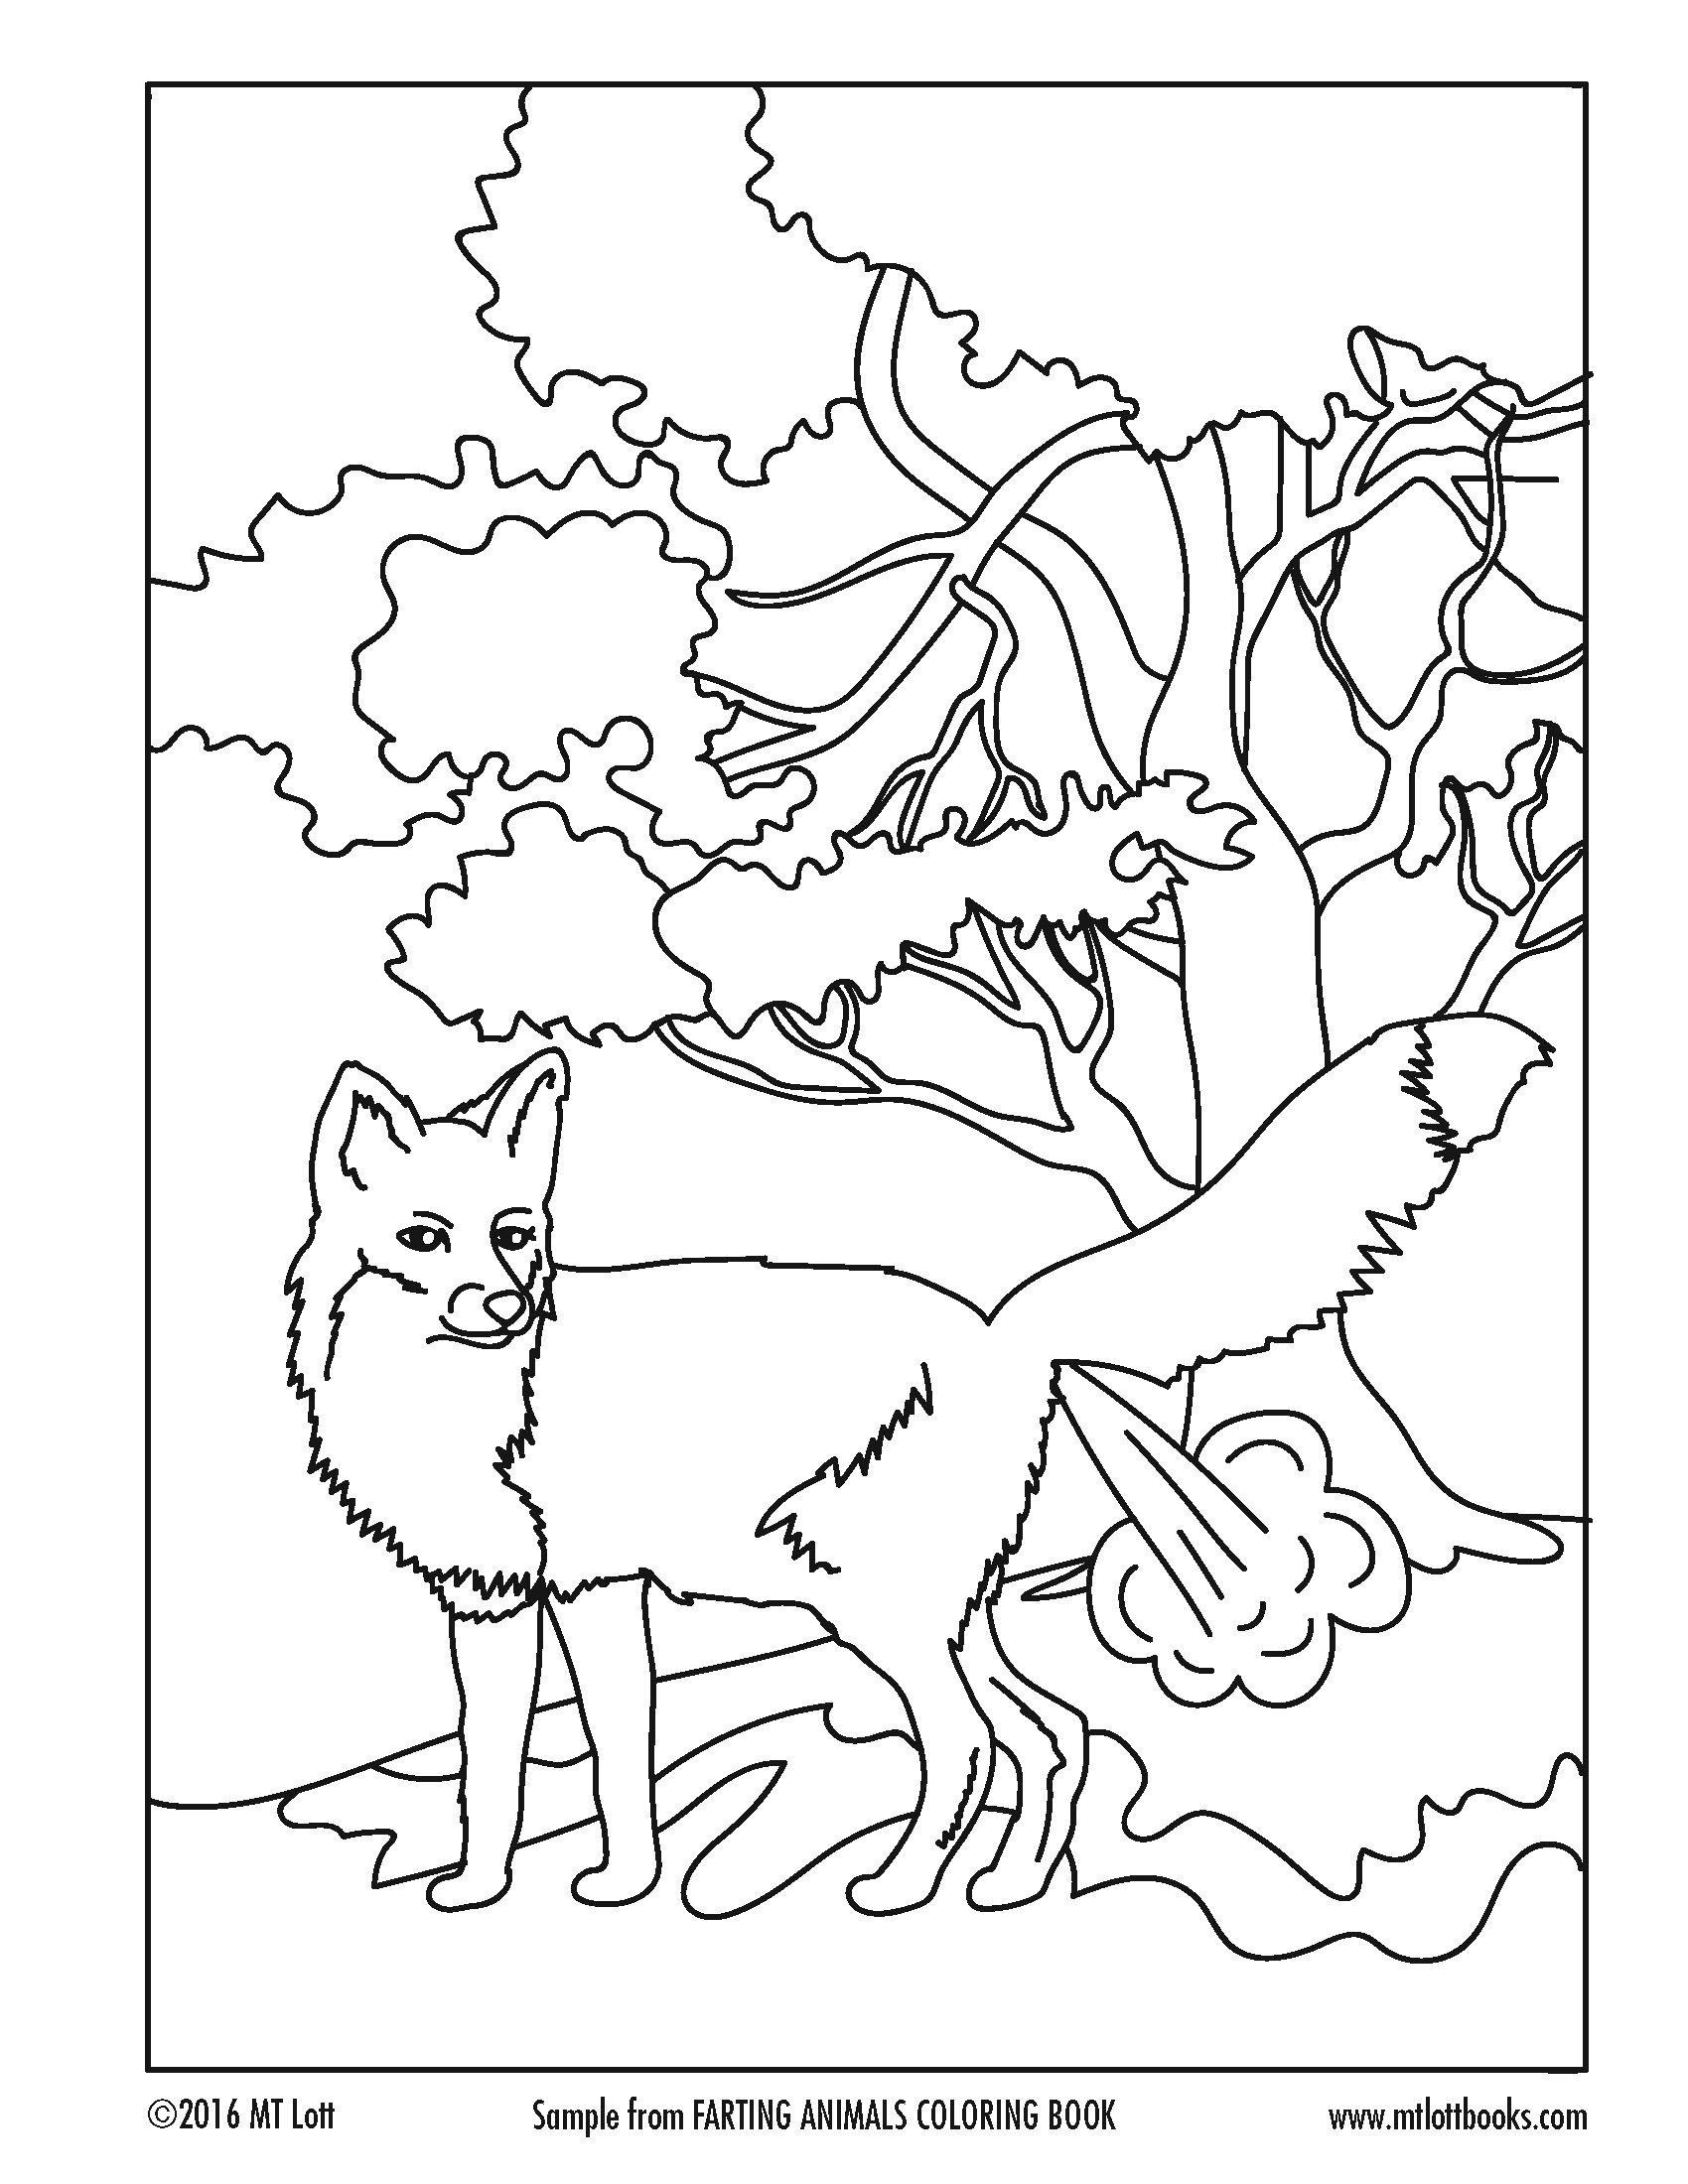 Coloring Pages Love Your Neighbor Yourself Unique Free Coloring Page From M T Lott S Farting Animals Coloring Book